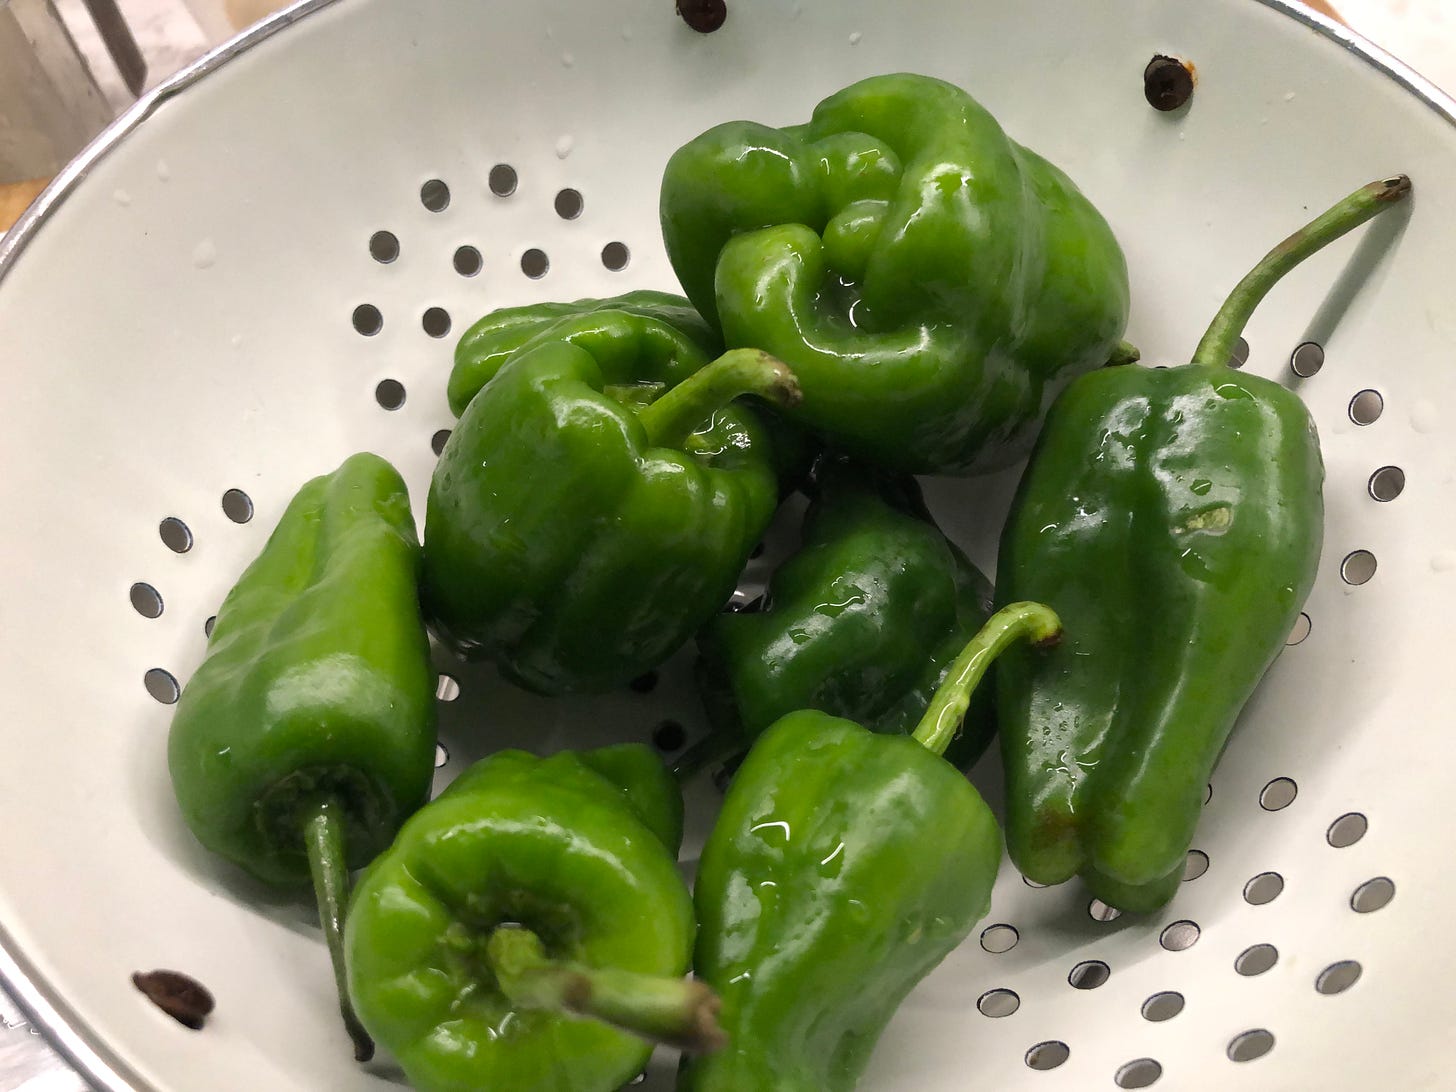 A colander full of just-washed, very large Padron peppers